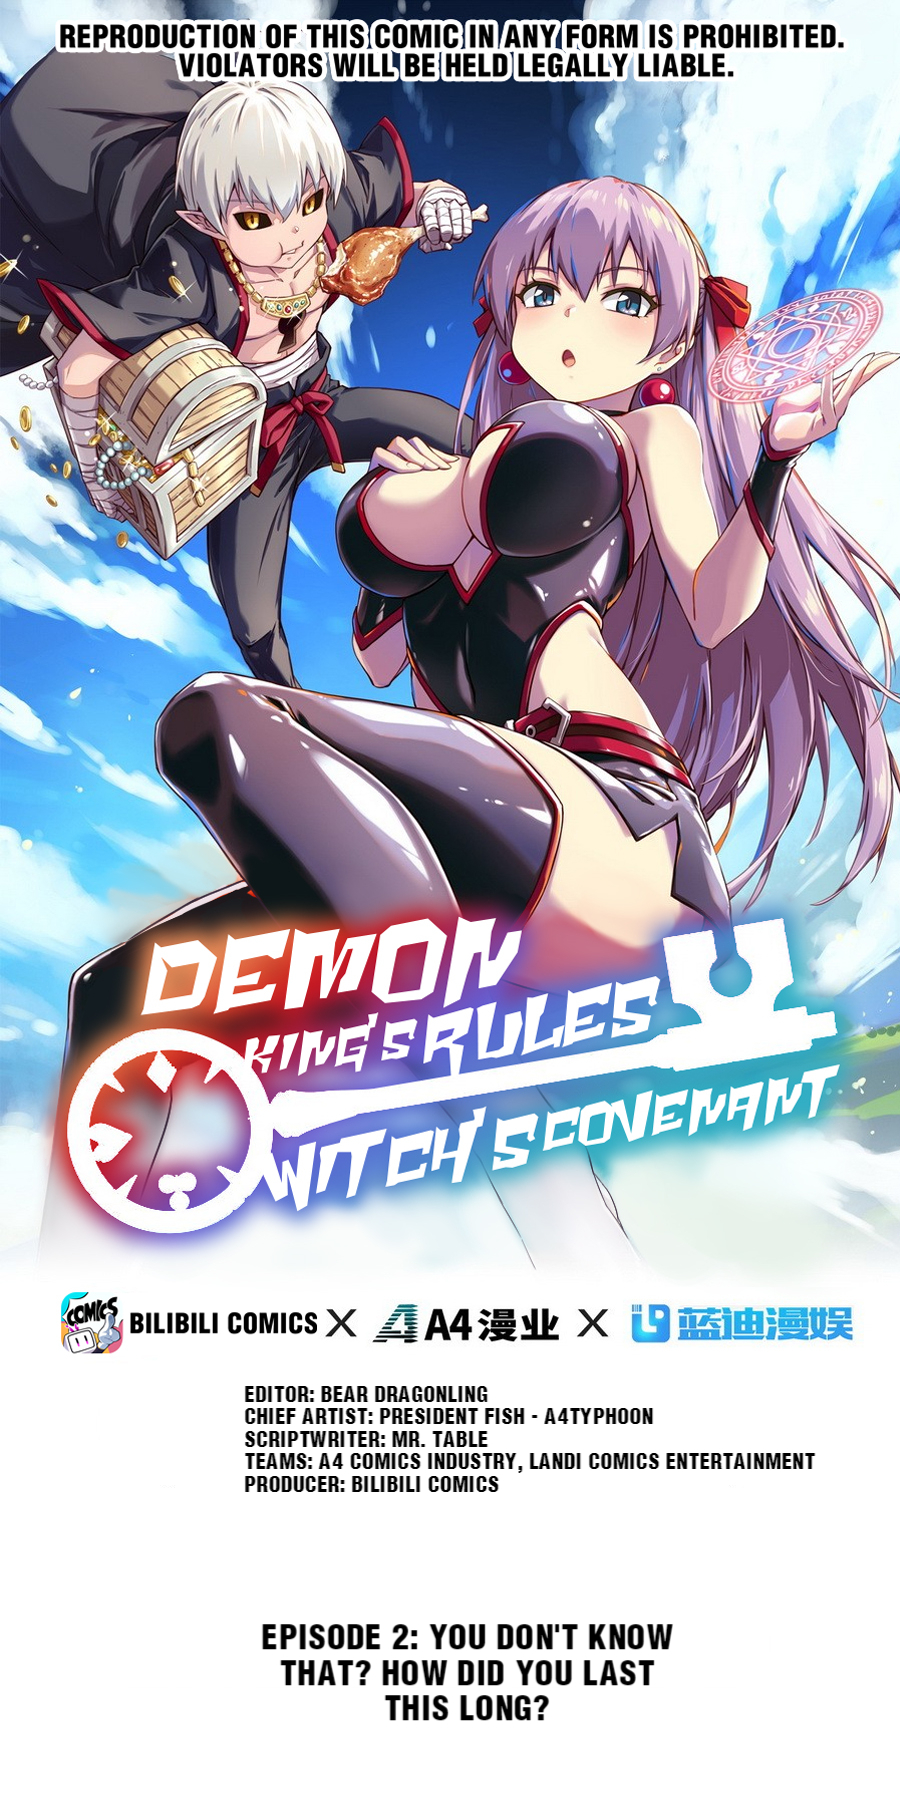 Demon King's Rules X Witch's Covenant Vol.1 Chapter 2